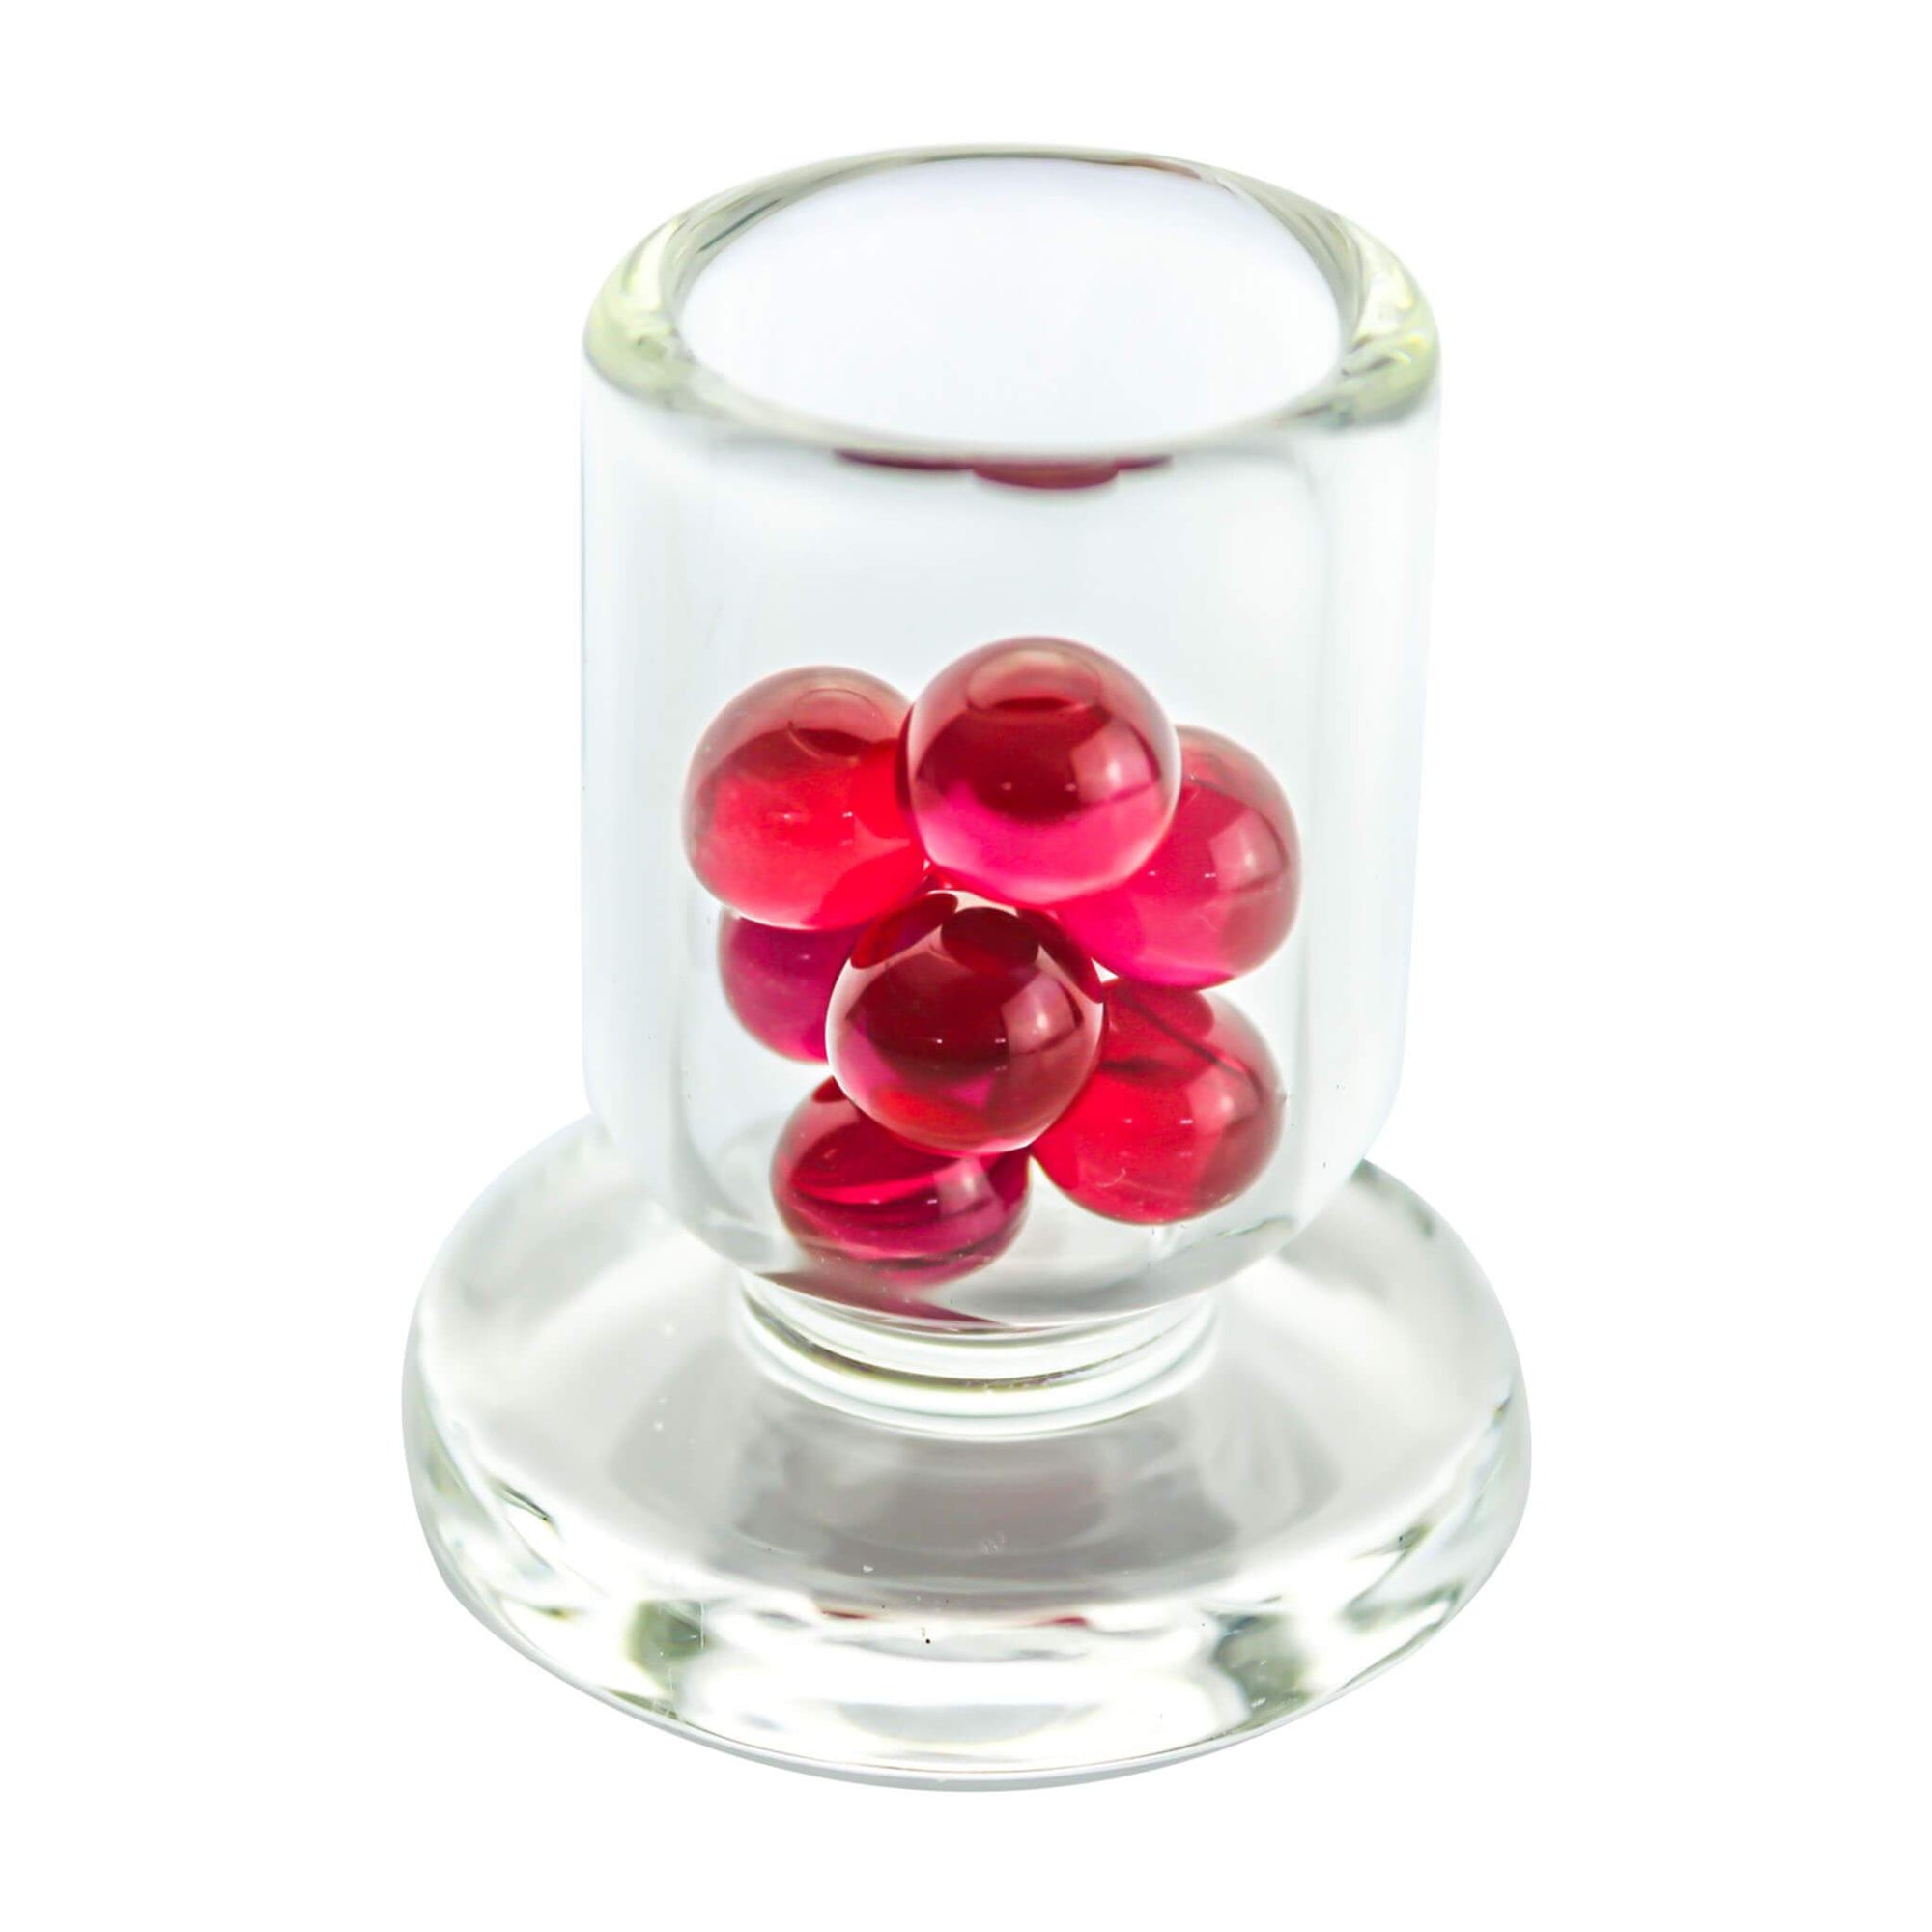 8mm Terp (Dab) Pearls-Ruby | Ruby Dab Pearls In Banger | the dabbing specialists